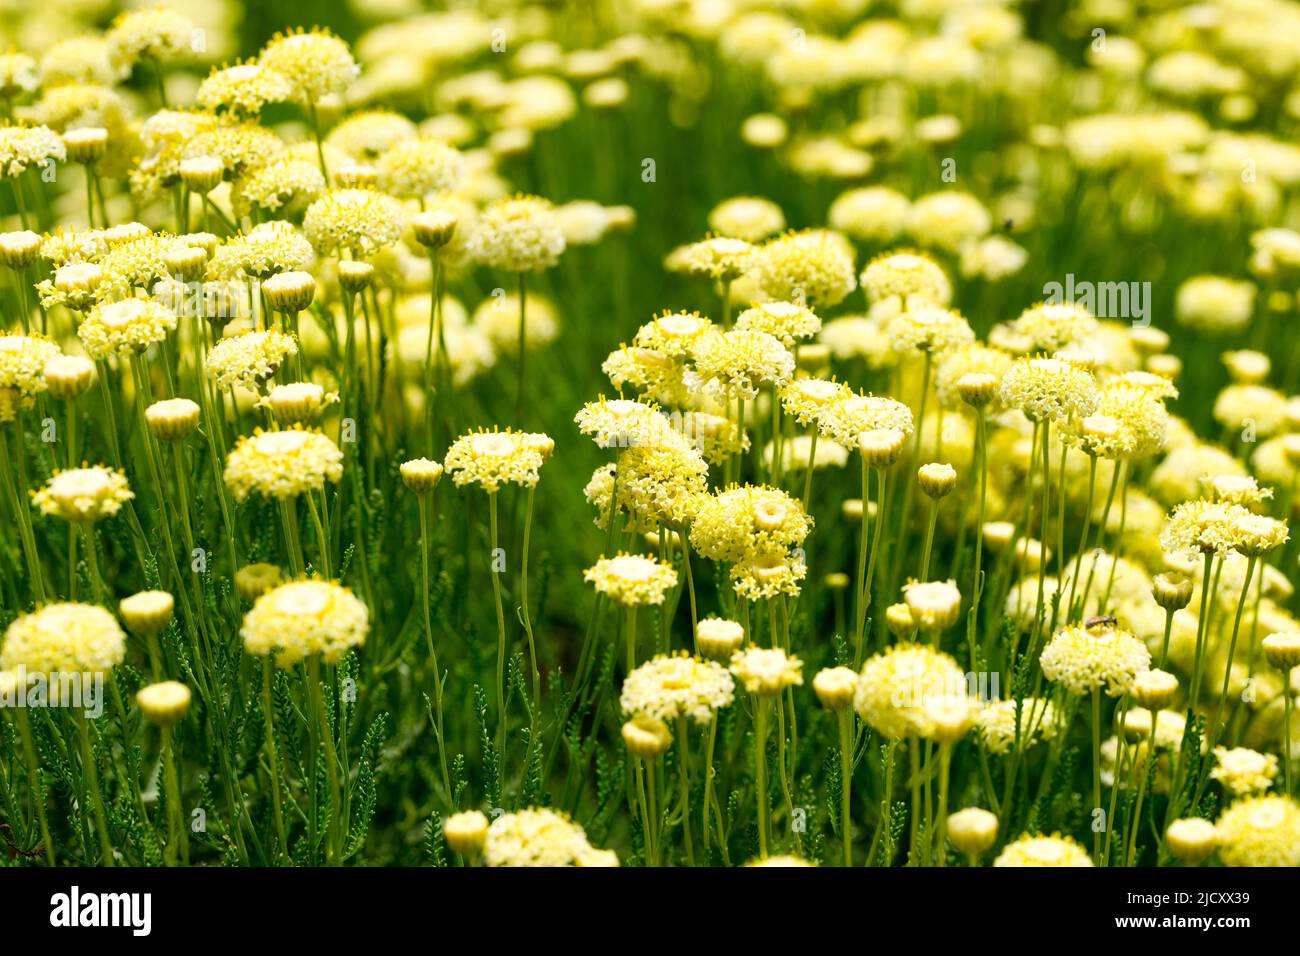 Santolina chamaecyparissus flower bed in bloom in the south of France Stock Photo